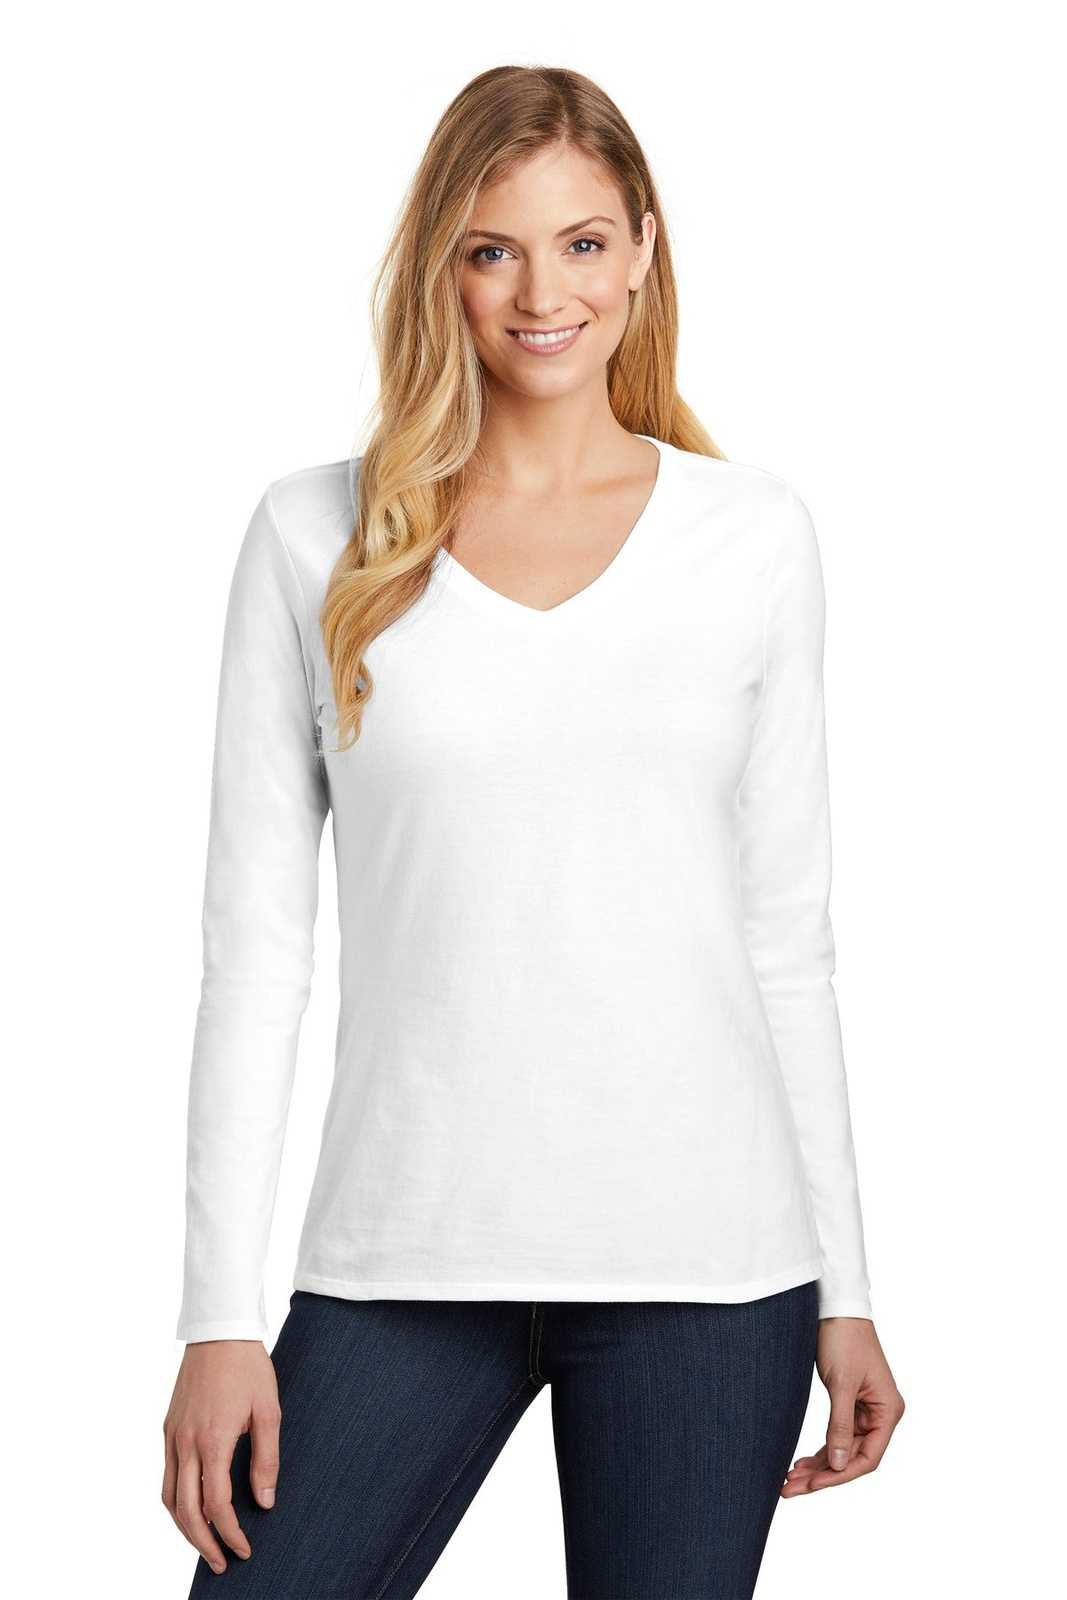 District DT6201 Women's Very Important Tee Long Sleeve V-Neck - White - HIT a Double - 1